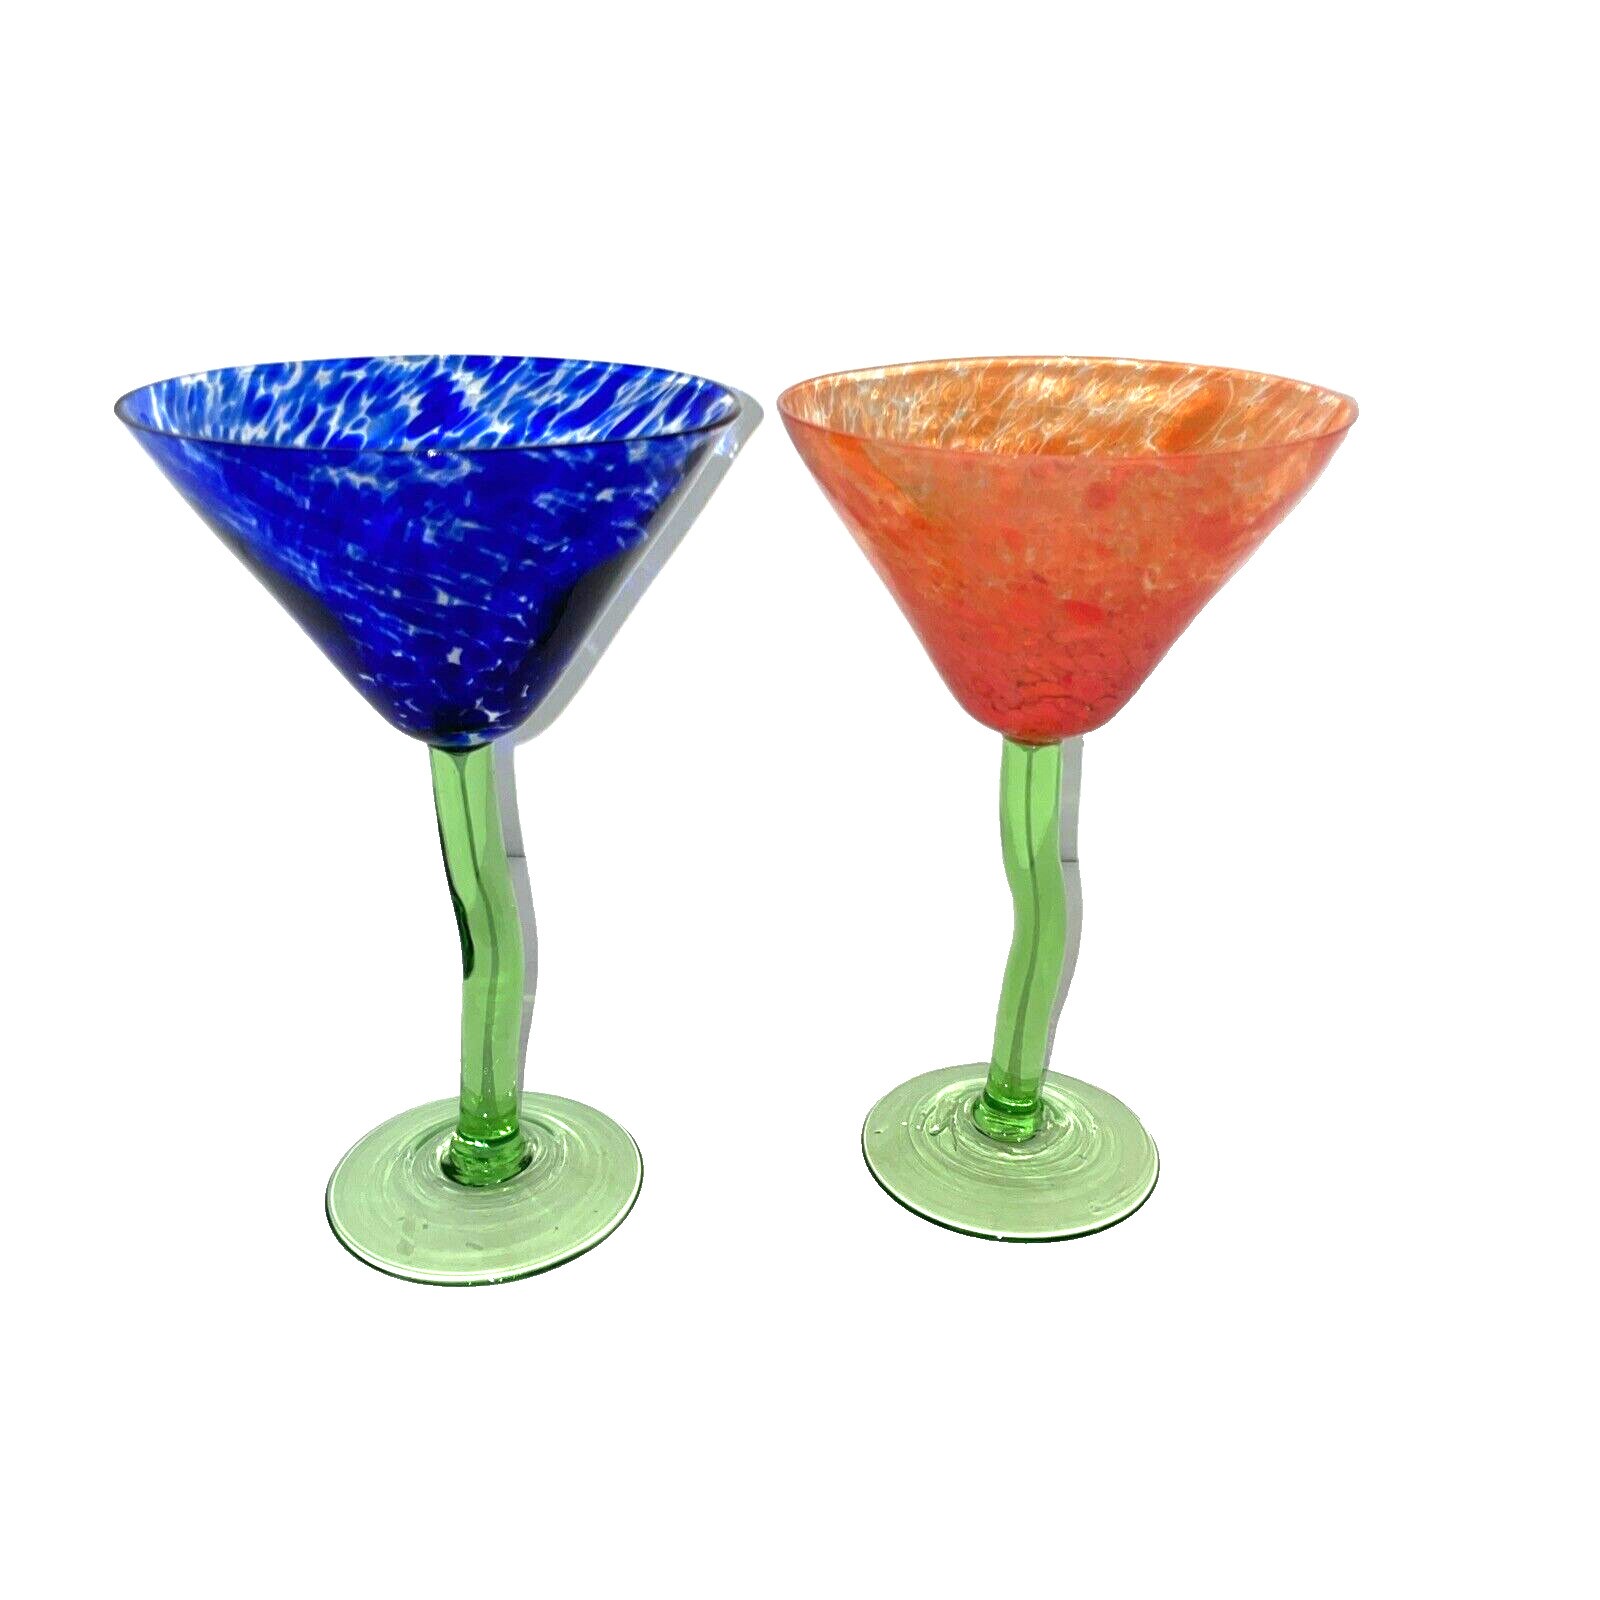 Two Handcrafted Art Nouveau Martini Glasses Splatter Hand Blown